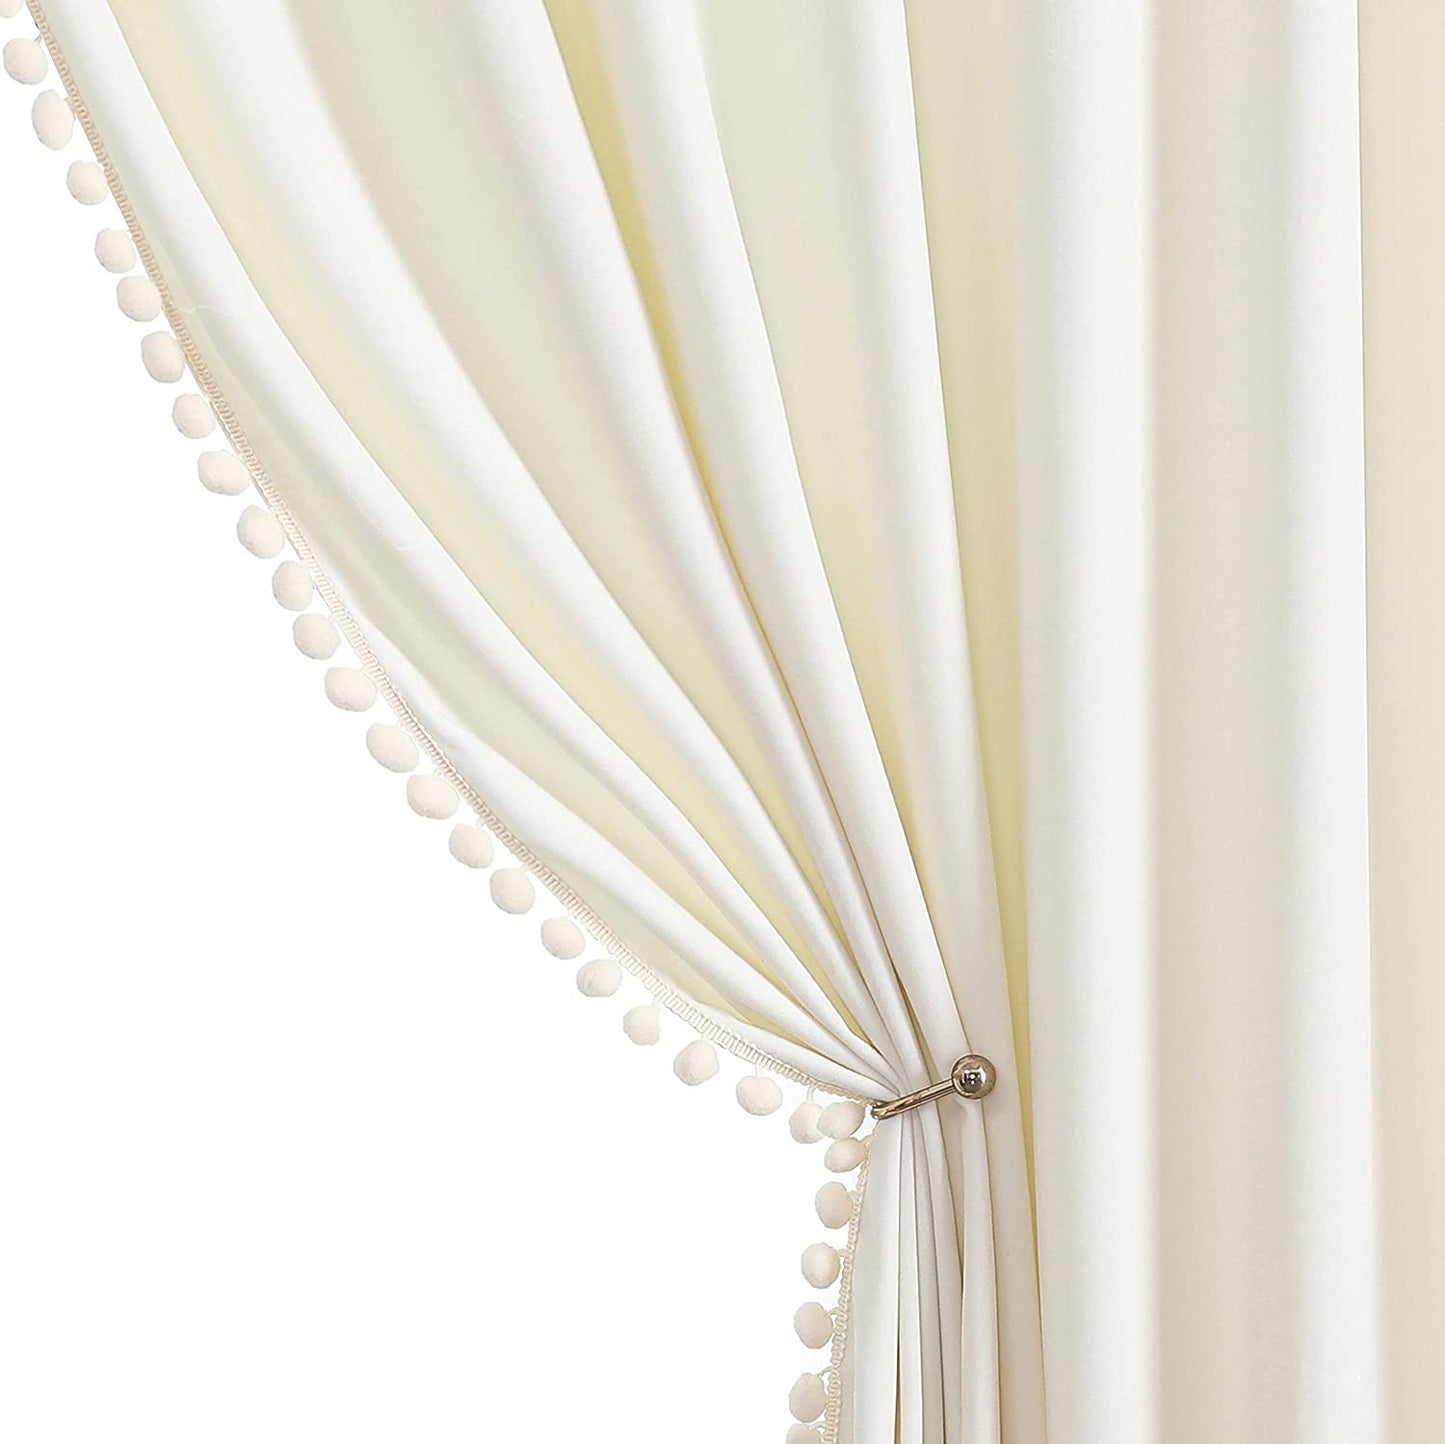 Benedeco Green Velvet Curtains for Bedroom Window, Super Soft Luxury Drapes, Room Darkening Thermal Insulated Rod Pocket Curtain for Living Room, W52 by L84 Inches, 2 Panels  Benedeco A-Ivorywhite W52 * L108 | 2 Panels 